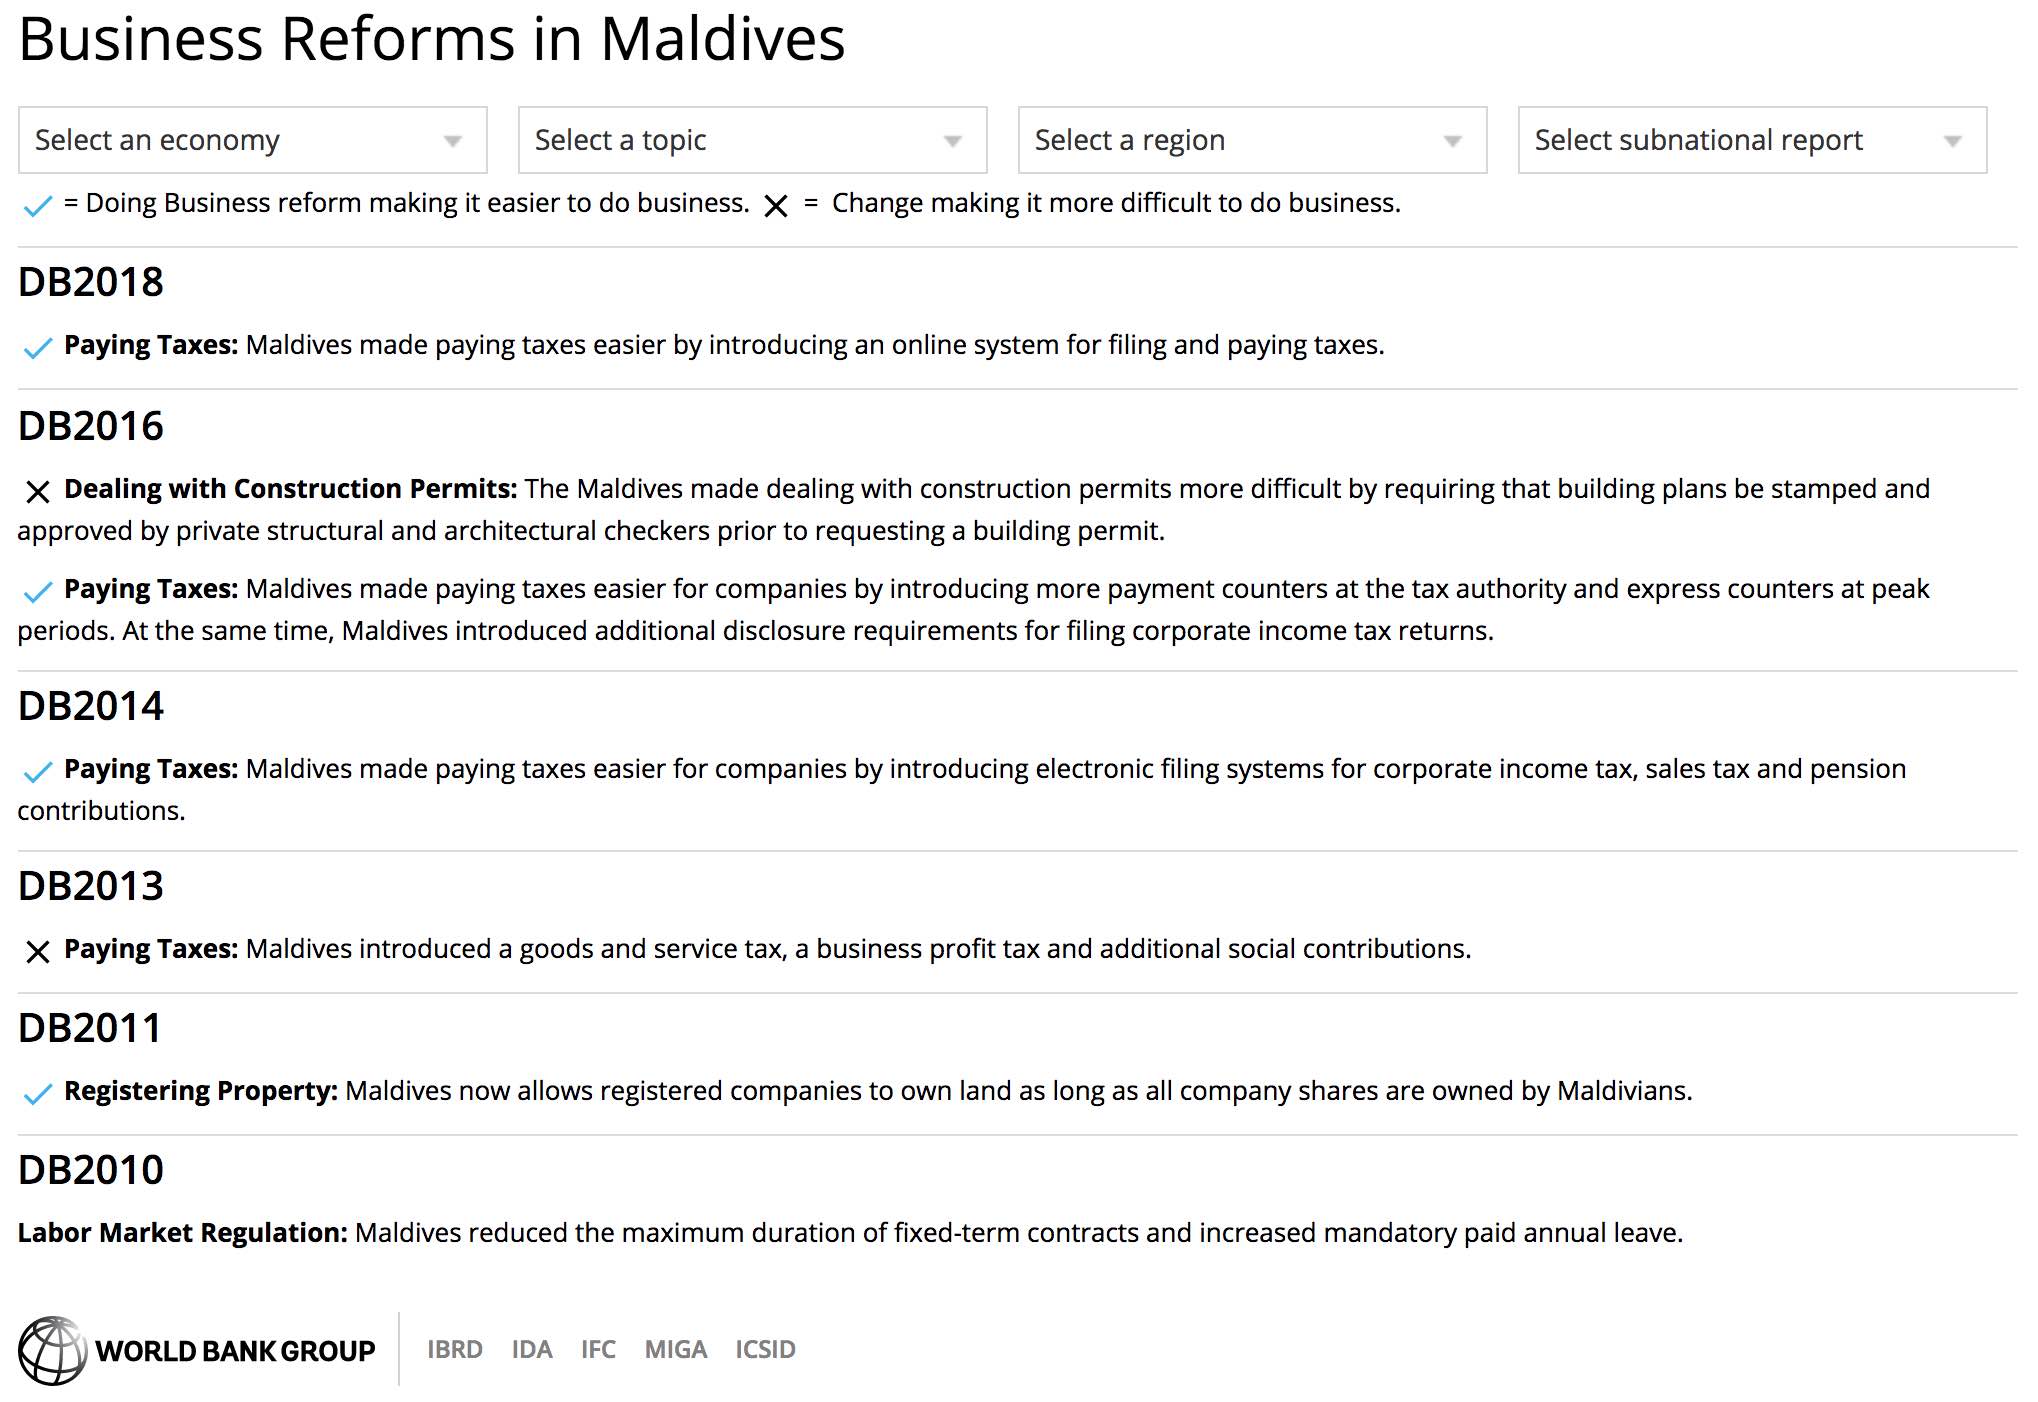 Business Reforms in Maldives, The World Bank